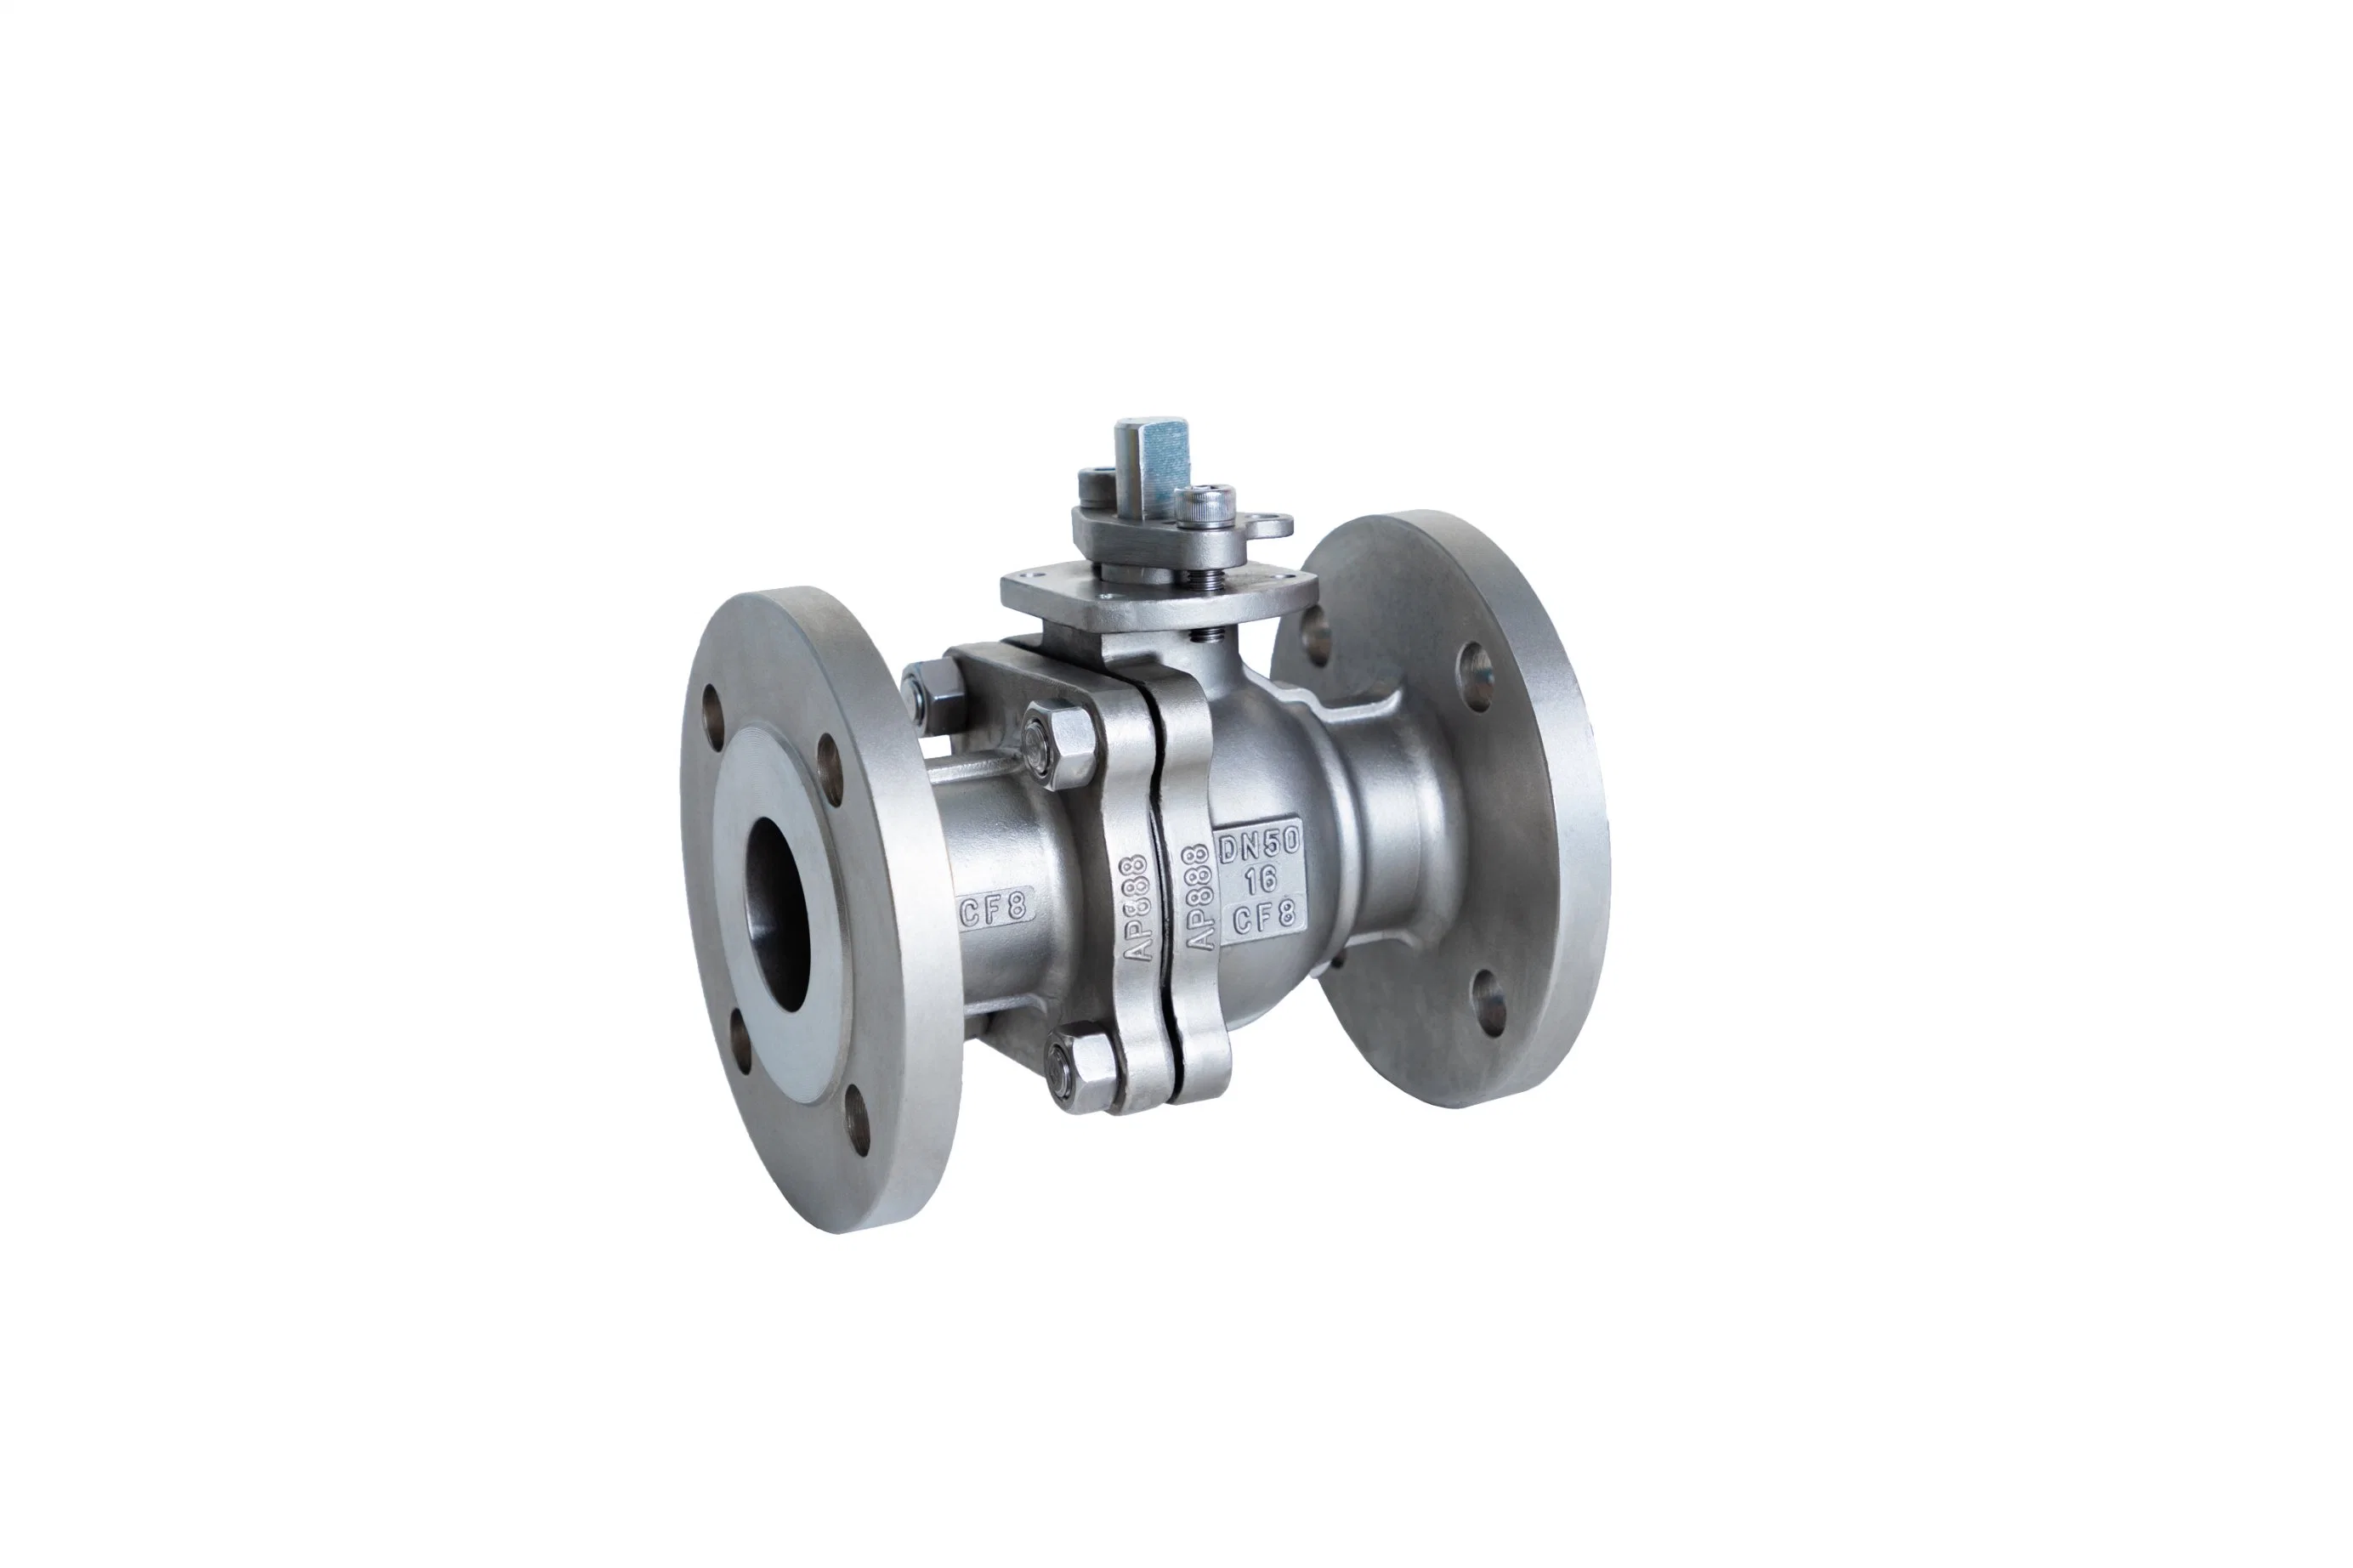 Q41f Stainless Steel Flange Floating Ball Valve for Water Oil Gas